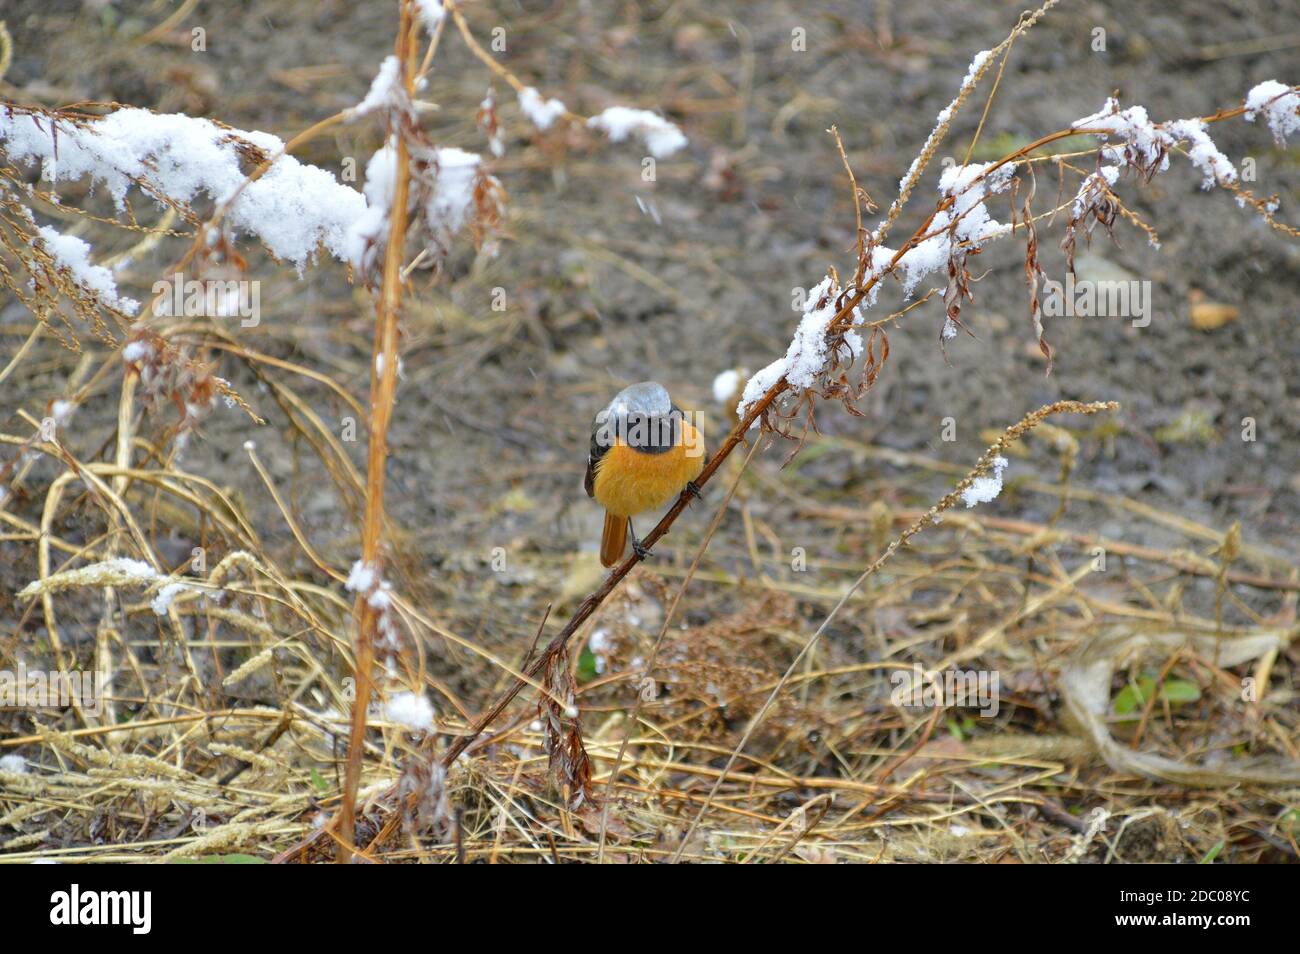 Daurian redstart or Common redstart bird perches on the branch with snow. Adult male bird. Spring, southeastern Russia. Stock Photo